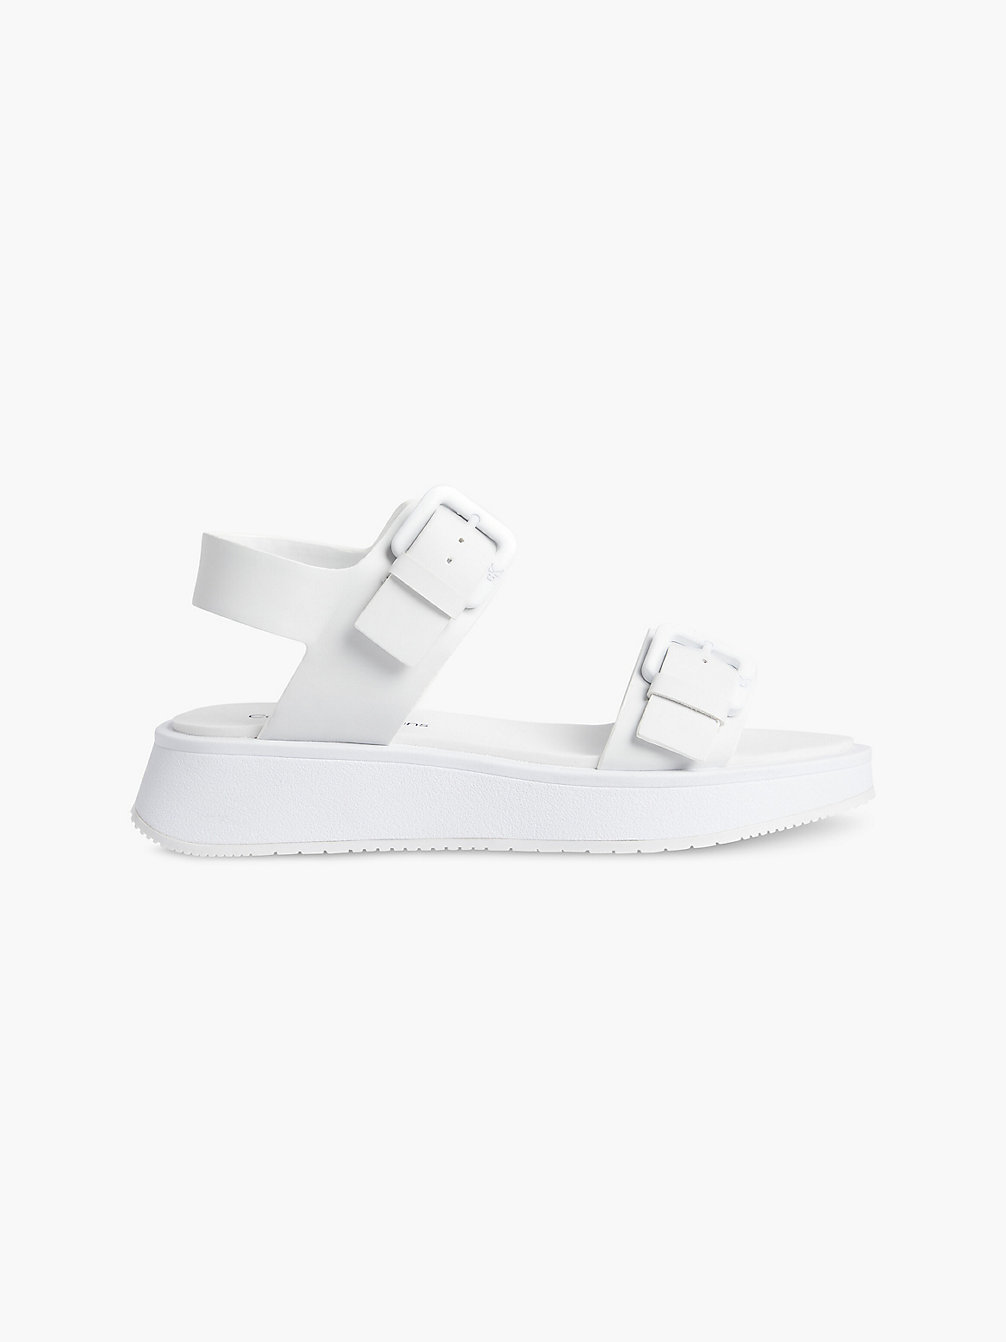 BRIGHT WHITE Recycled Faux Leather Sandals undefined women Calvin Klein